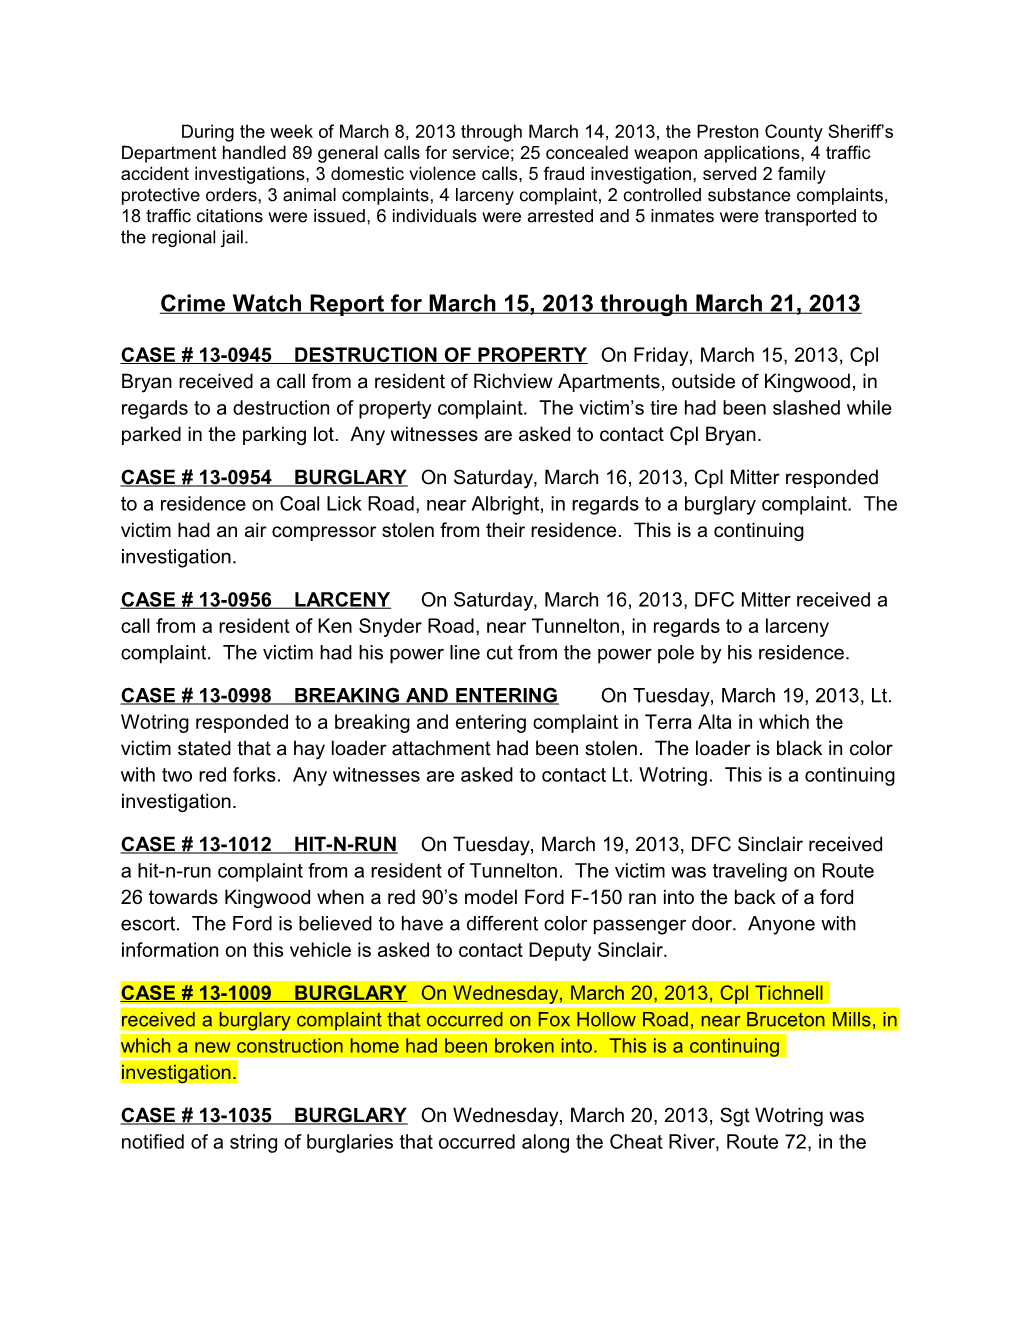 Crime Watch Report for March 15, 2013 Through March 21, 2013